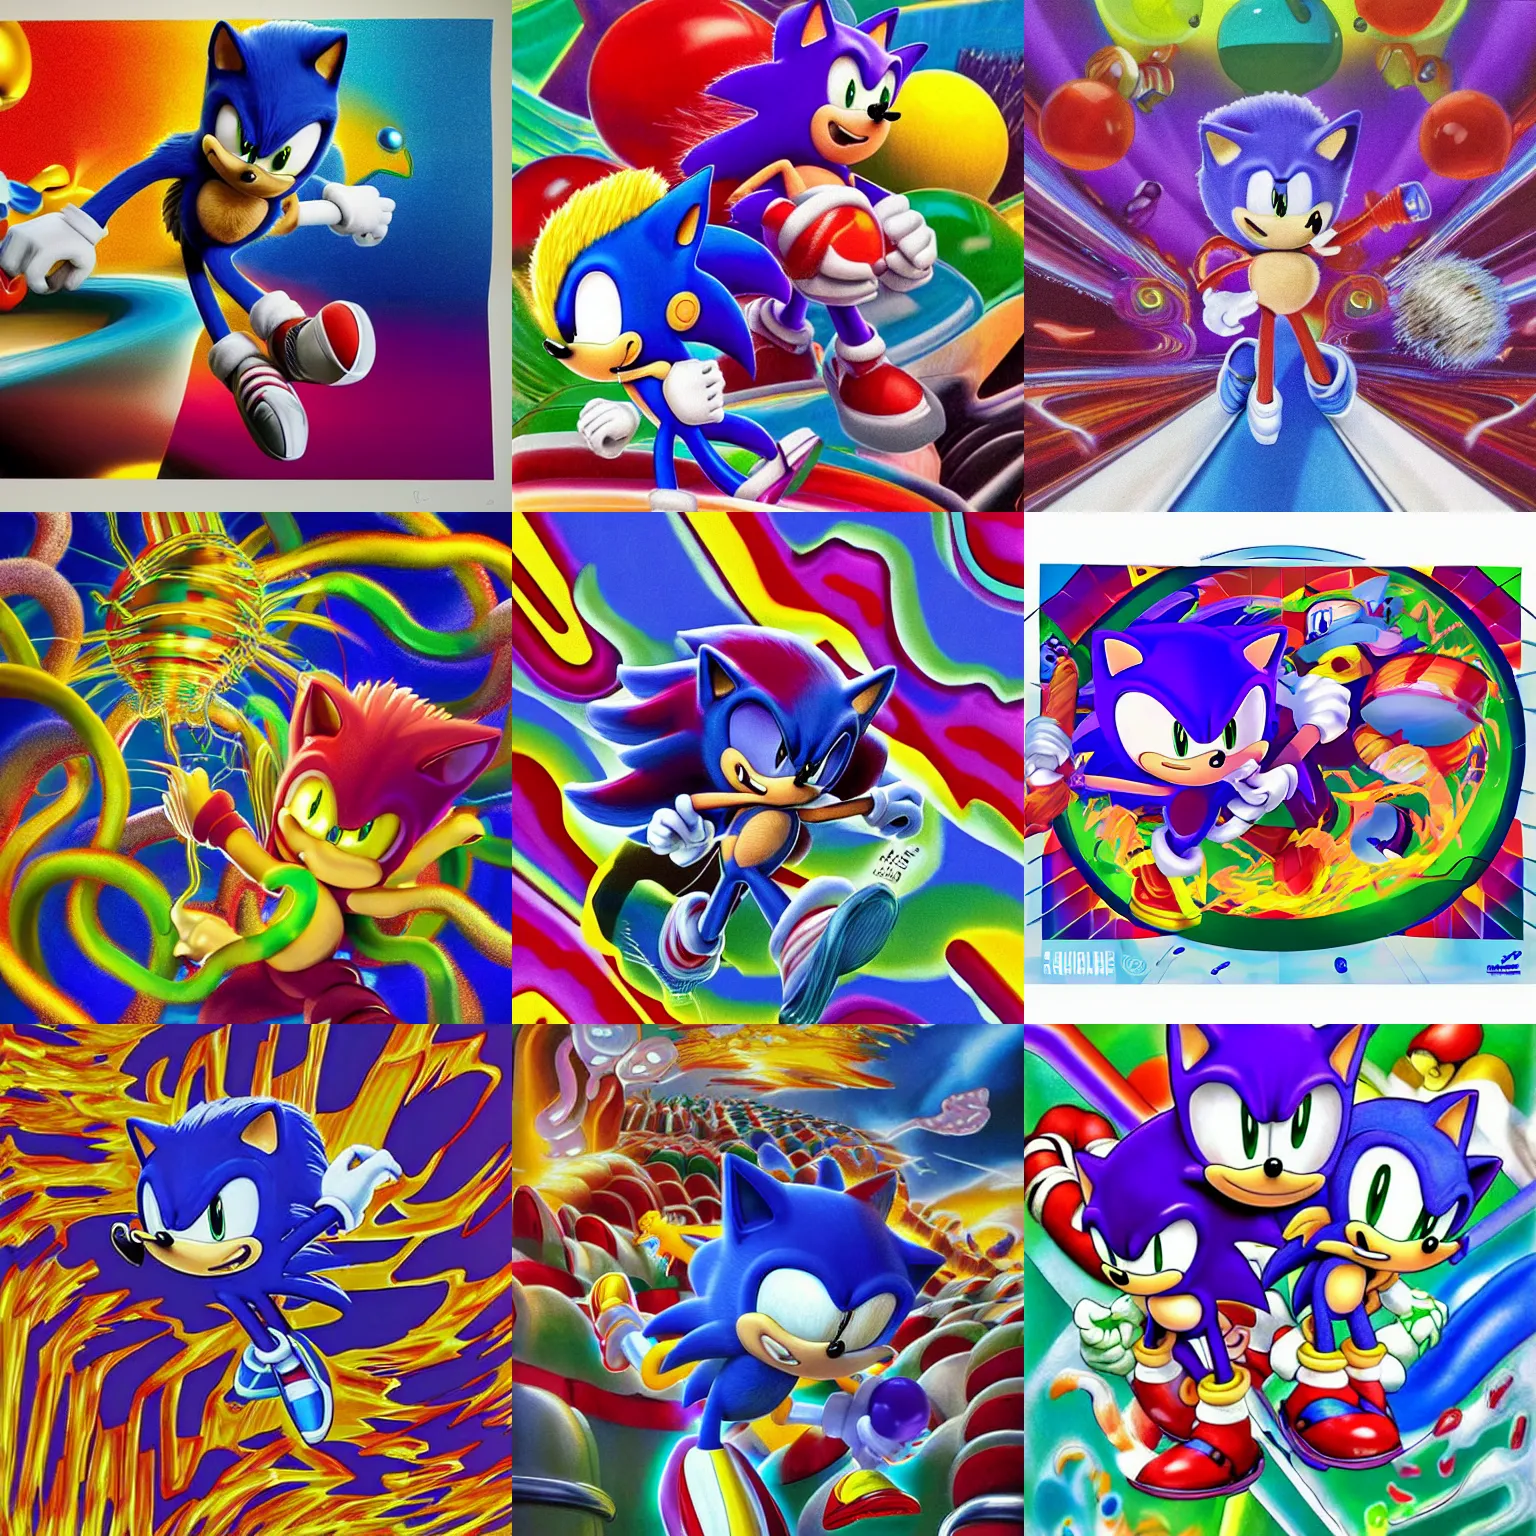 Prompt: sonic hedgehog surreal, sharp, detailed professional, soft pastels, high quality airbrush art album cover of a liquid bubbles airbrush art lsd taffy dmt sonic the hedgehog dashing through cotton candy, purple gummy worms checkerboard background, 1 9 9 0 s 1 9 9 2 sega genesis rareware video game album cover